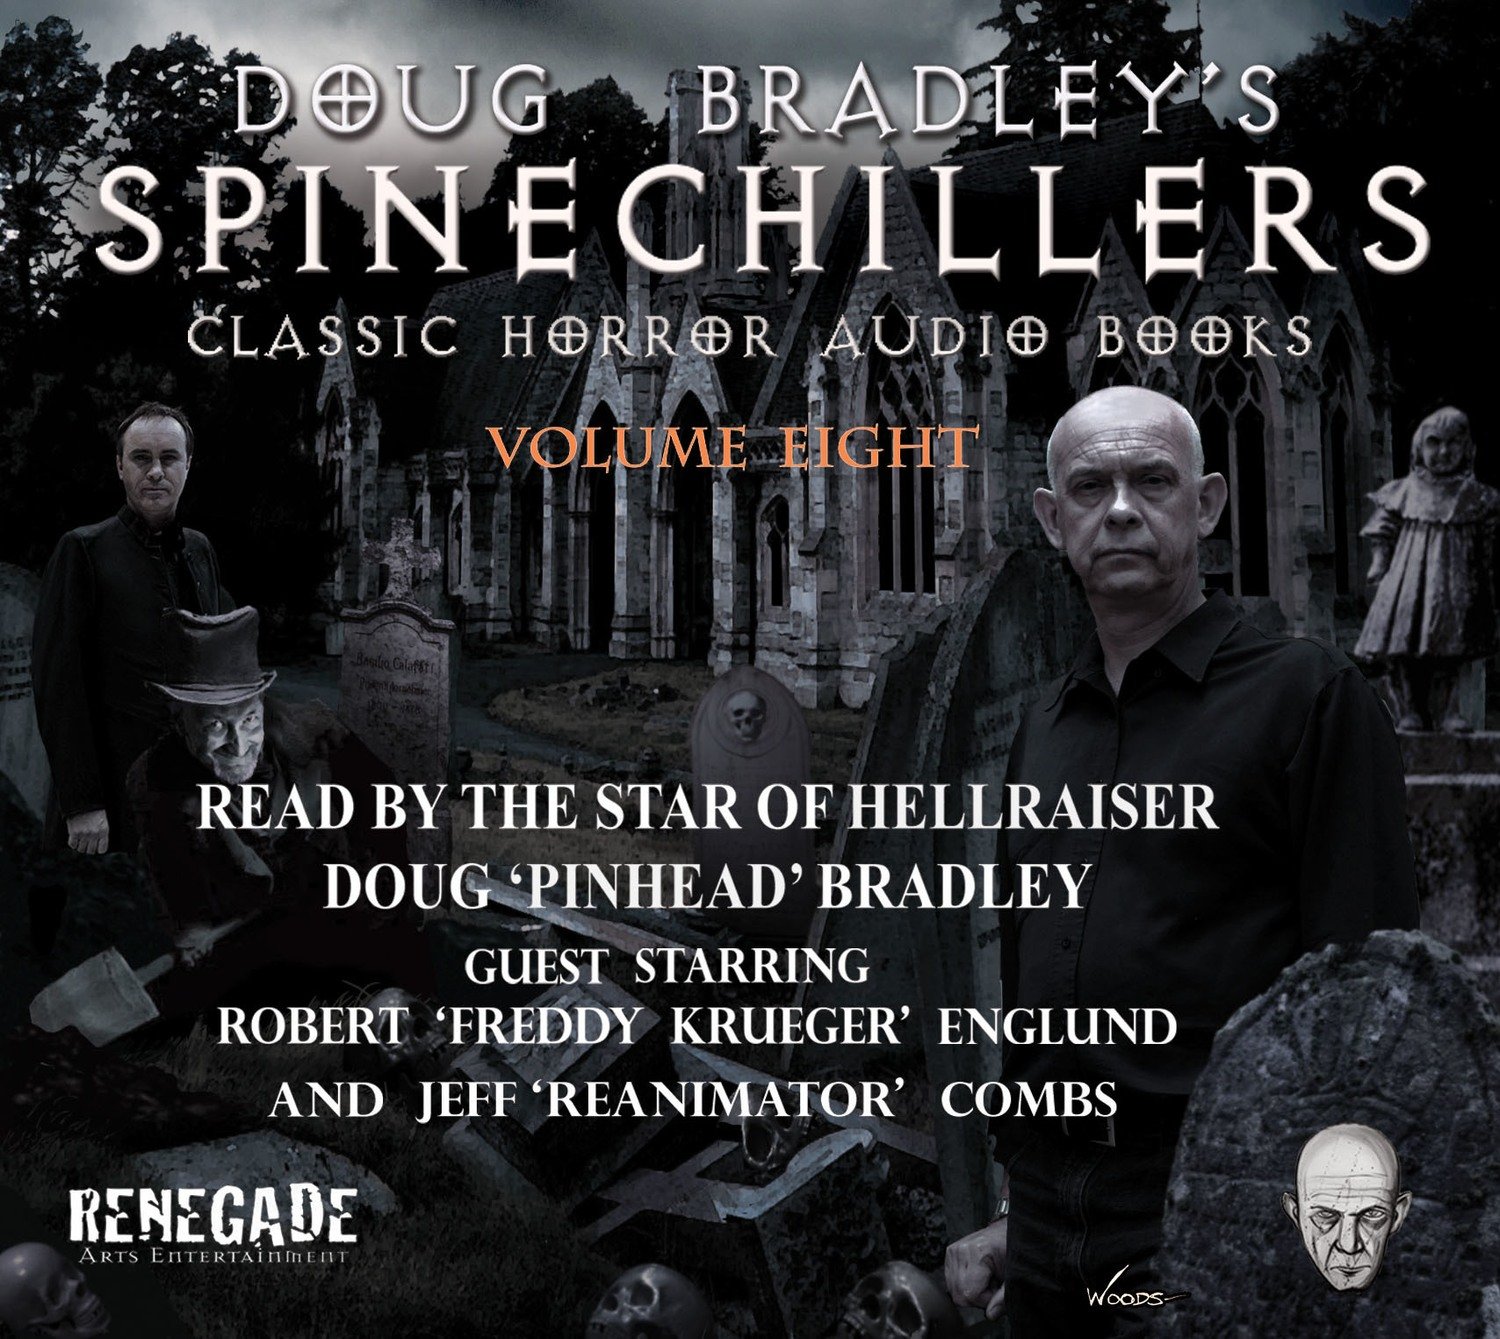 Spinechillers Volume 8